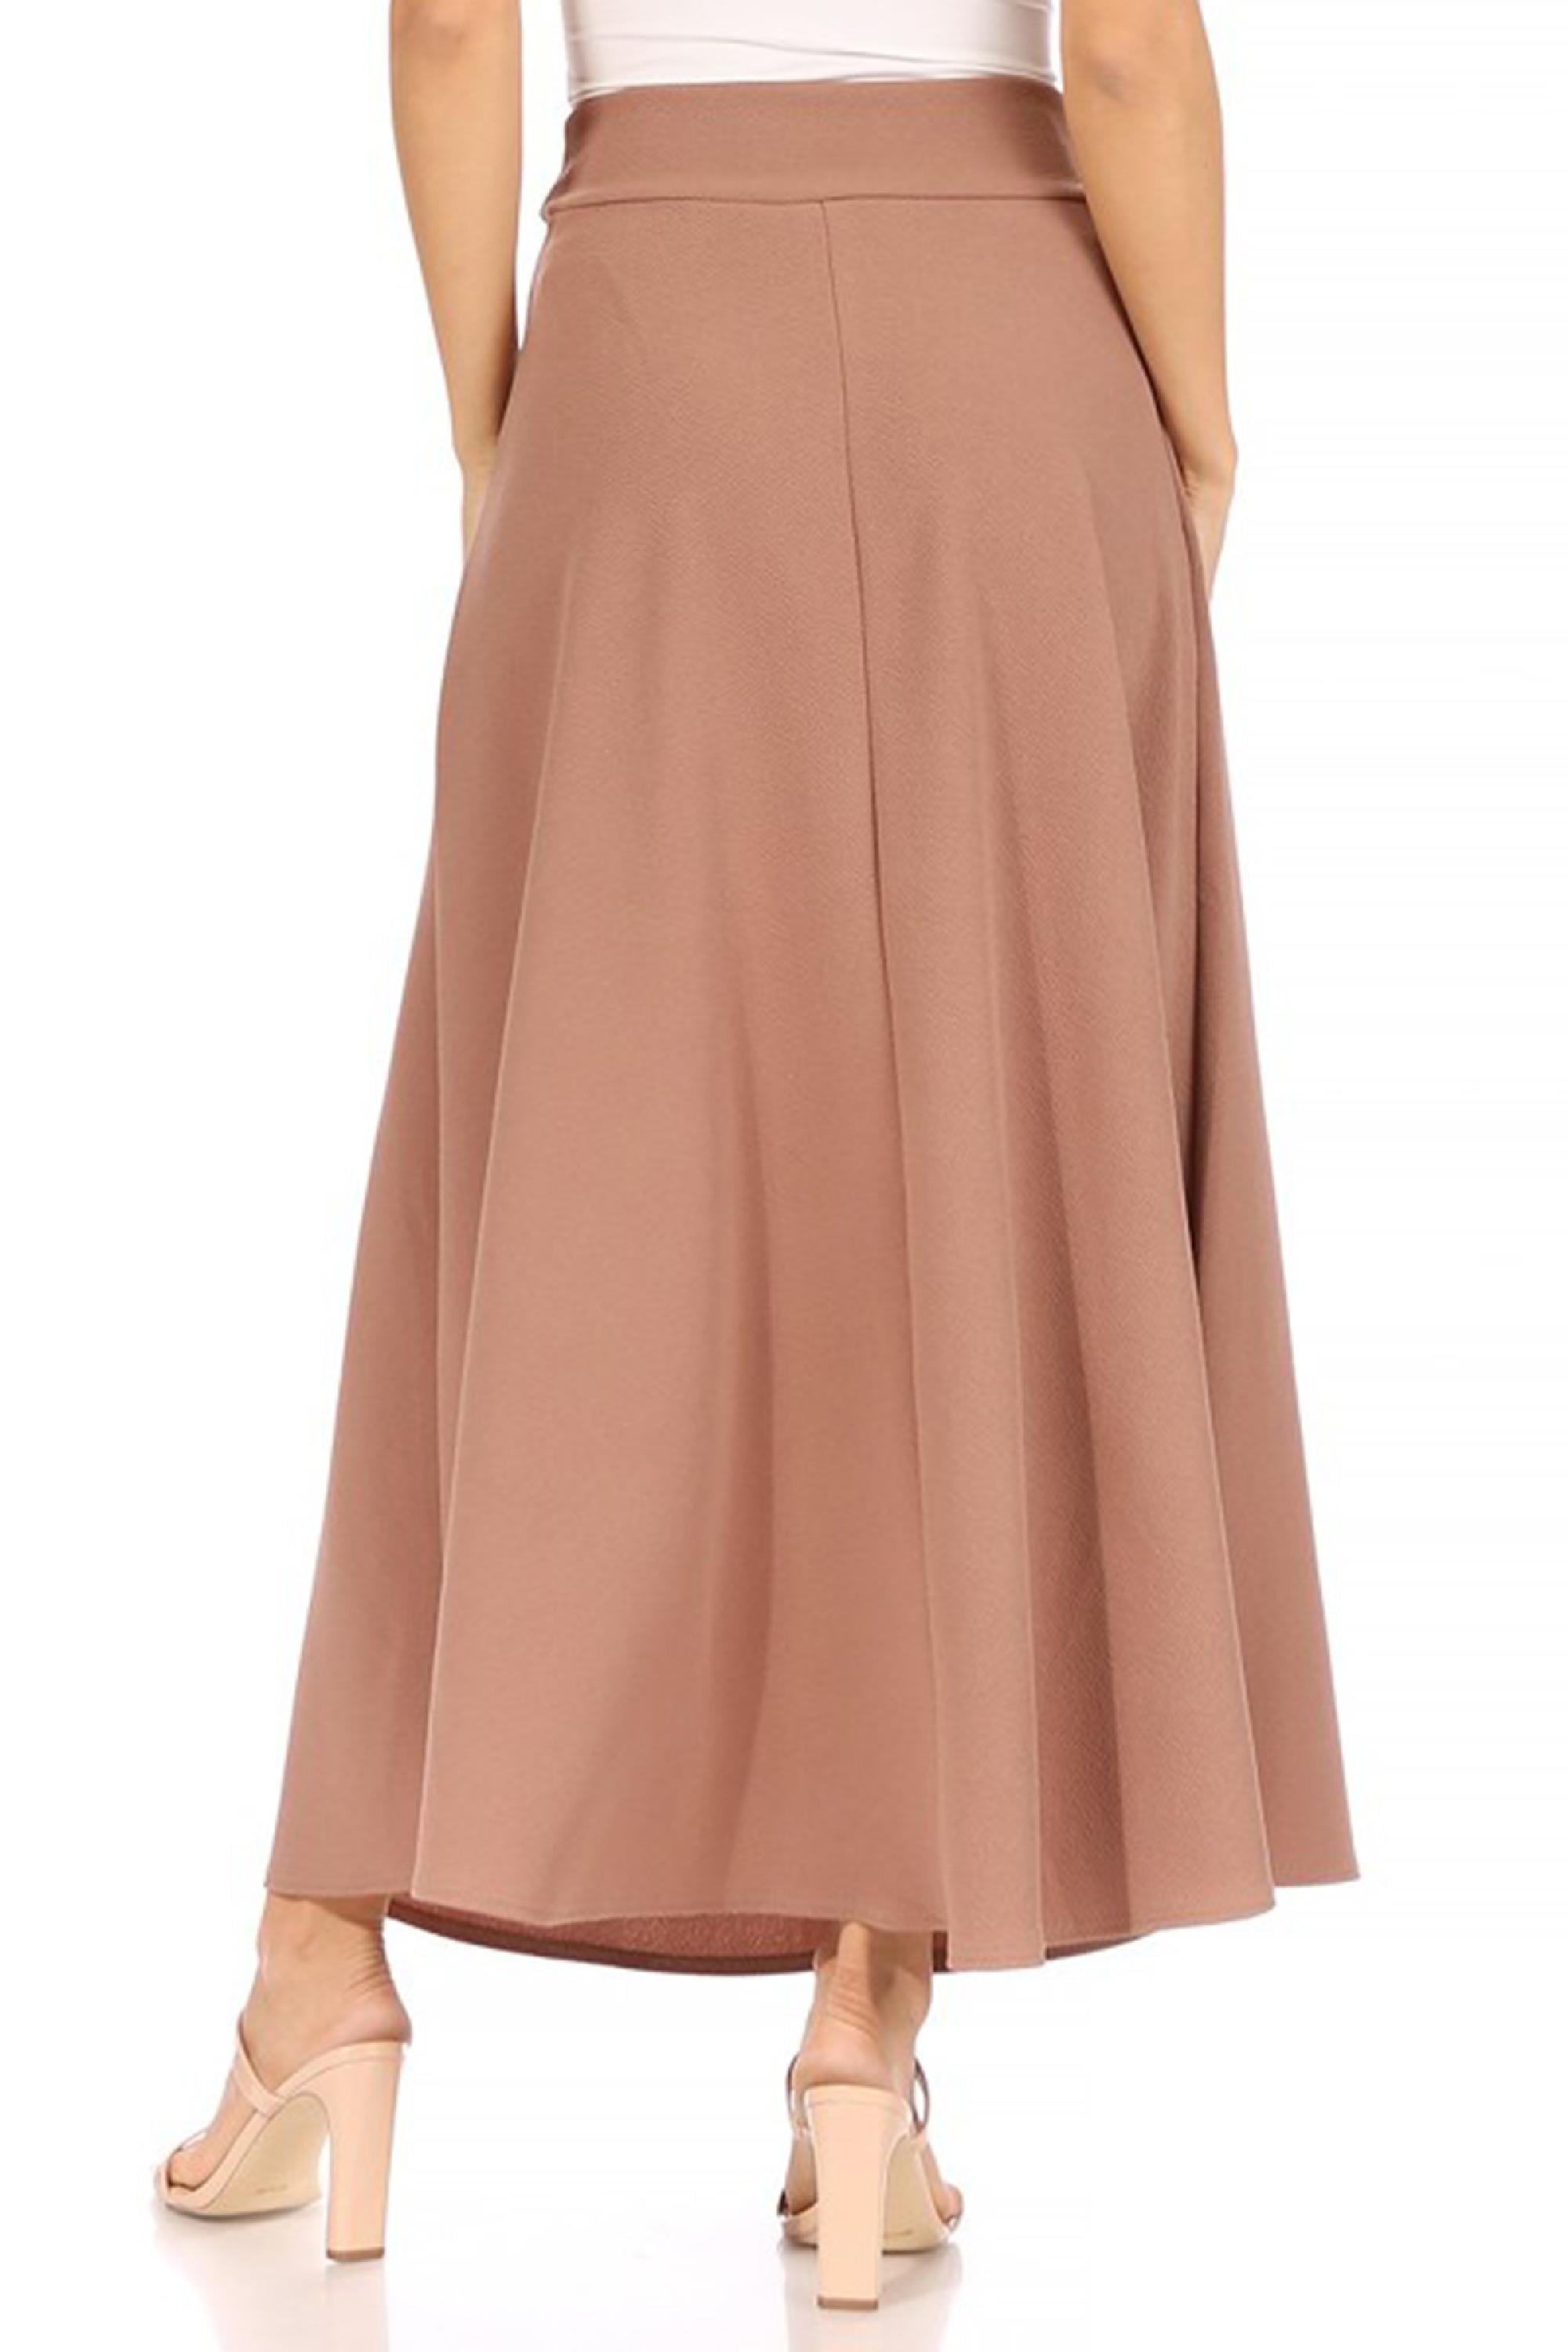 Buy GRECIILOOKS Women's Rayon Blend Fit and Flare Midi Skirt Brown, XS at